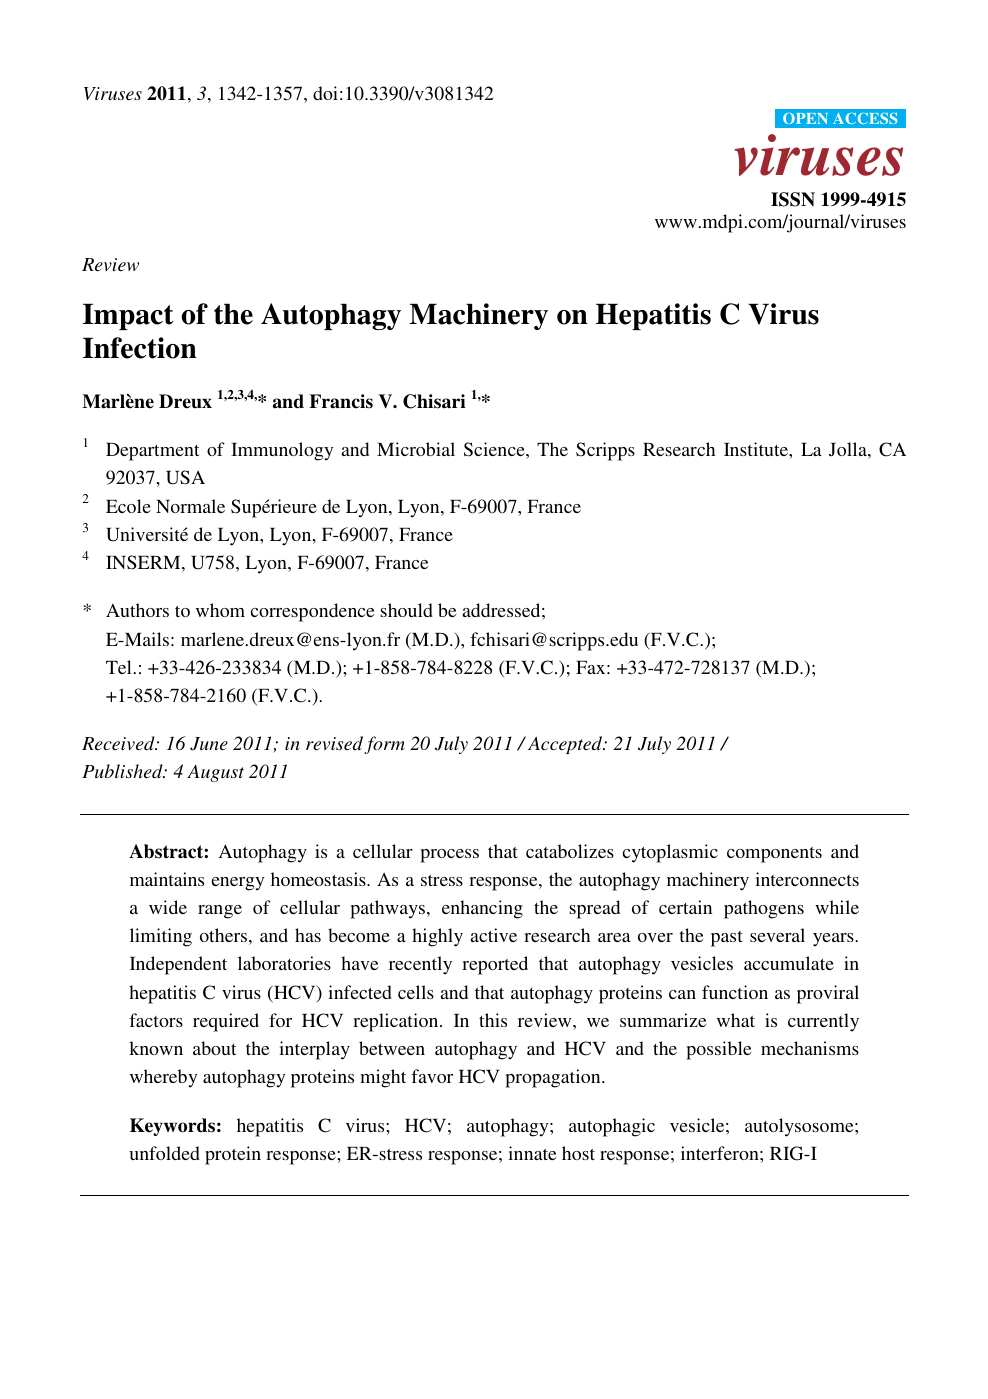 Impact Of The Autophagy Machinery On Hepatitis C Virus Infection Topic Of Research Paper In Biological Sciences Download Scholarly Article Pdf And Read For Free On Cyberleninka Open Science Hub